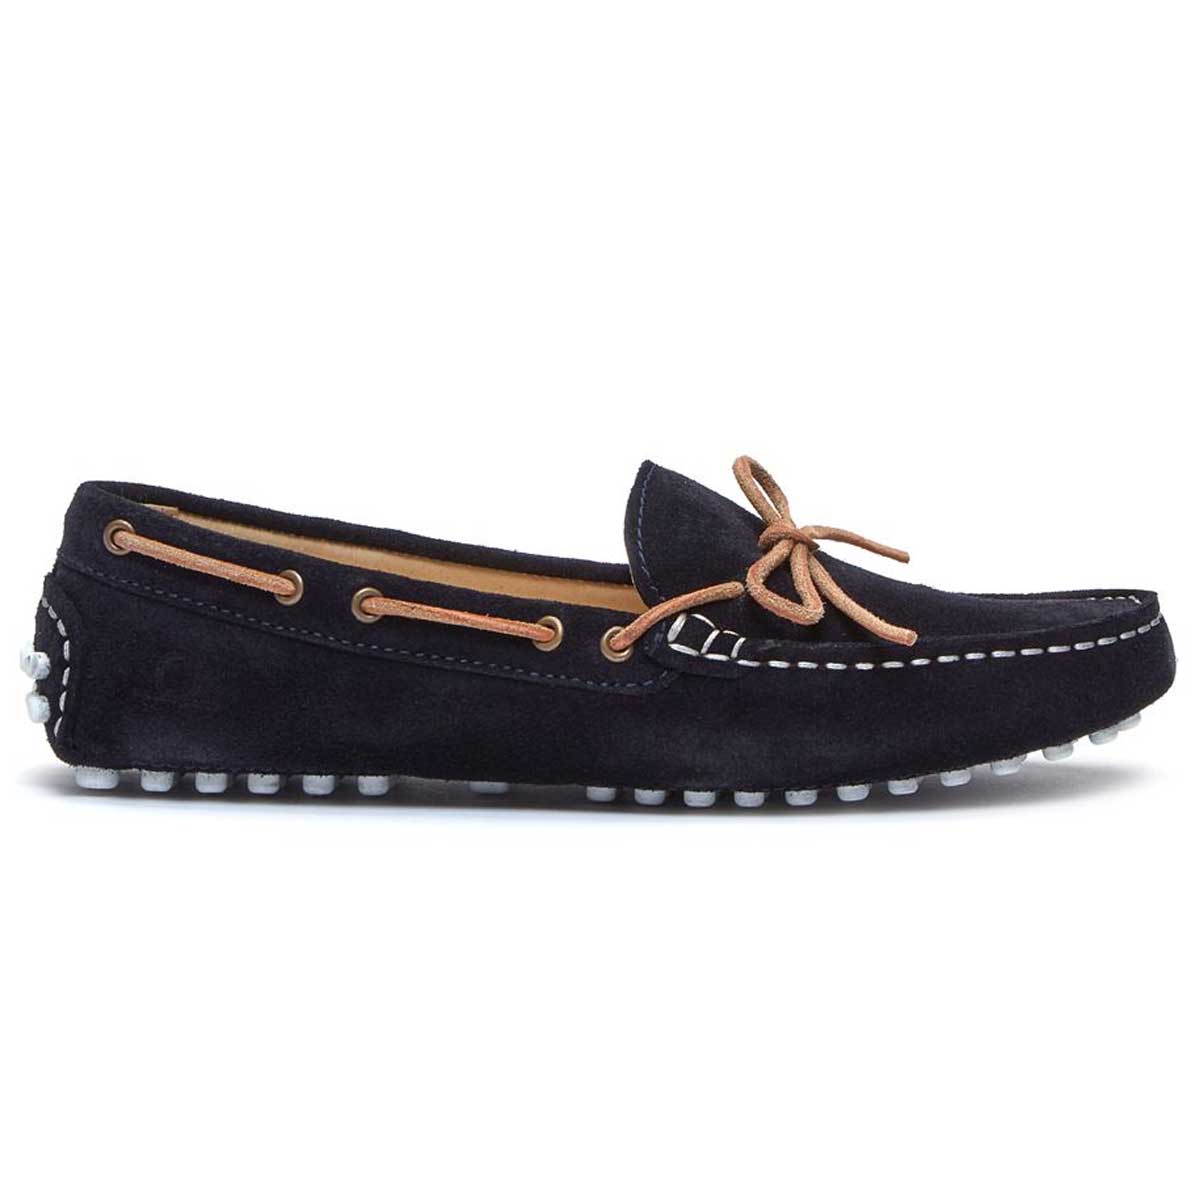 CHATHAM Aria Suede Driving Moccasins - Women's - Navy